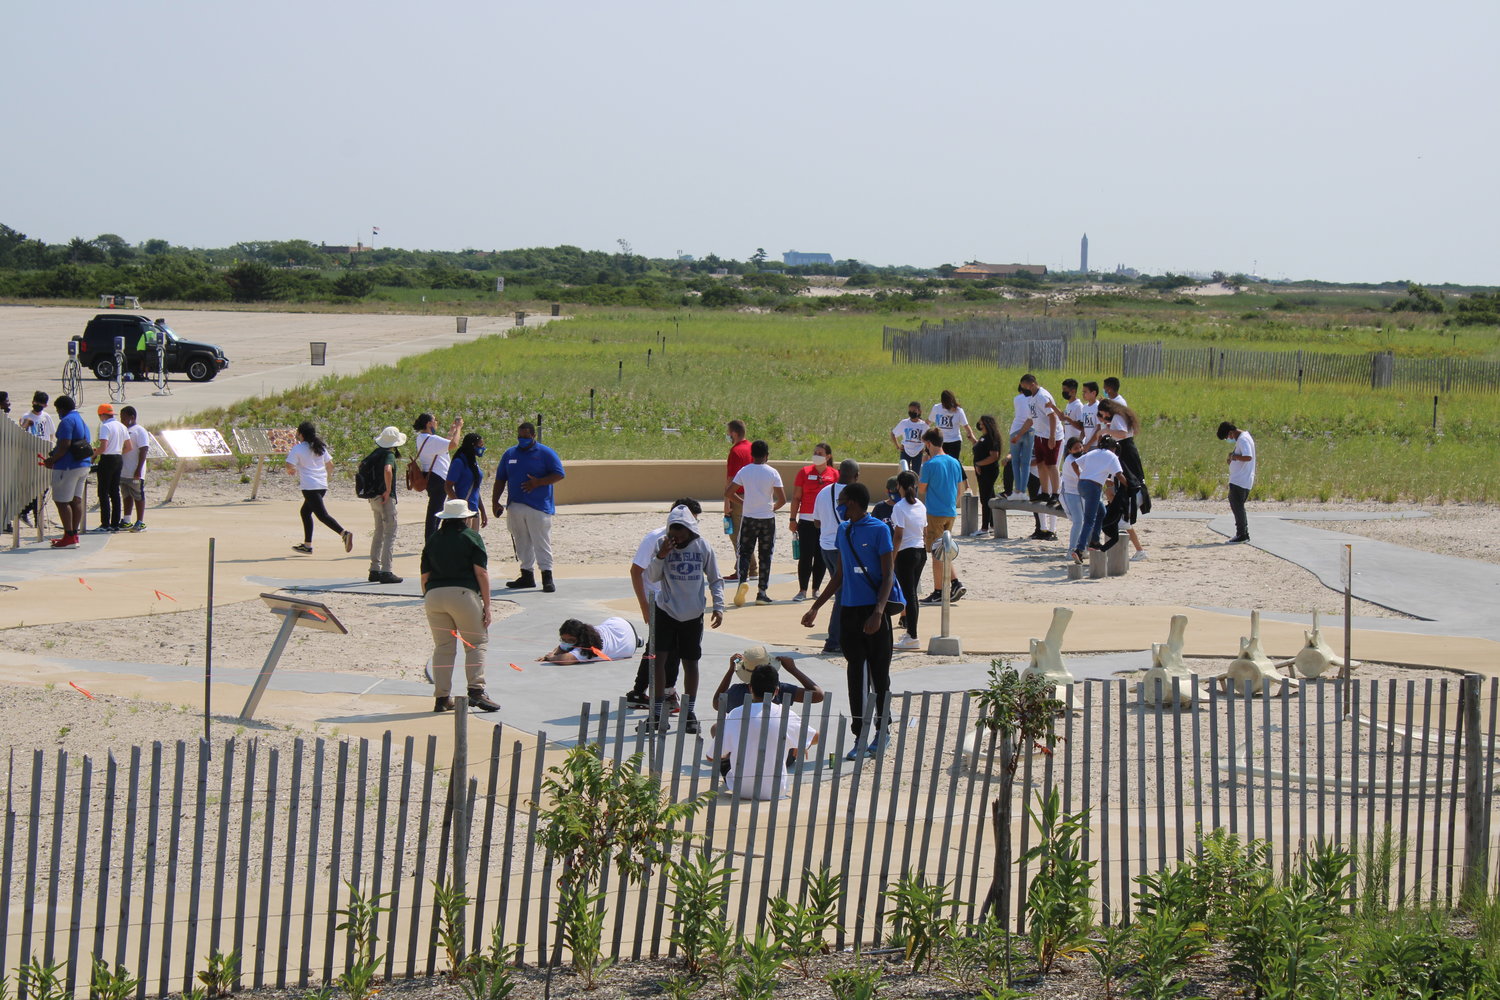 Students in My Brother’s Keeper Hempstead, operated through ABGS Middle School in the Hempstead Union Free School District, was the first group of students at Jones Beach State Park on July 22.